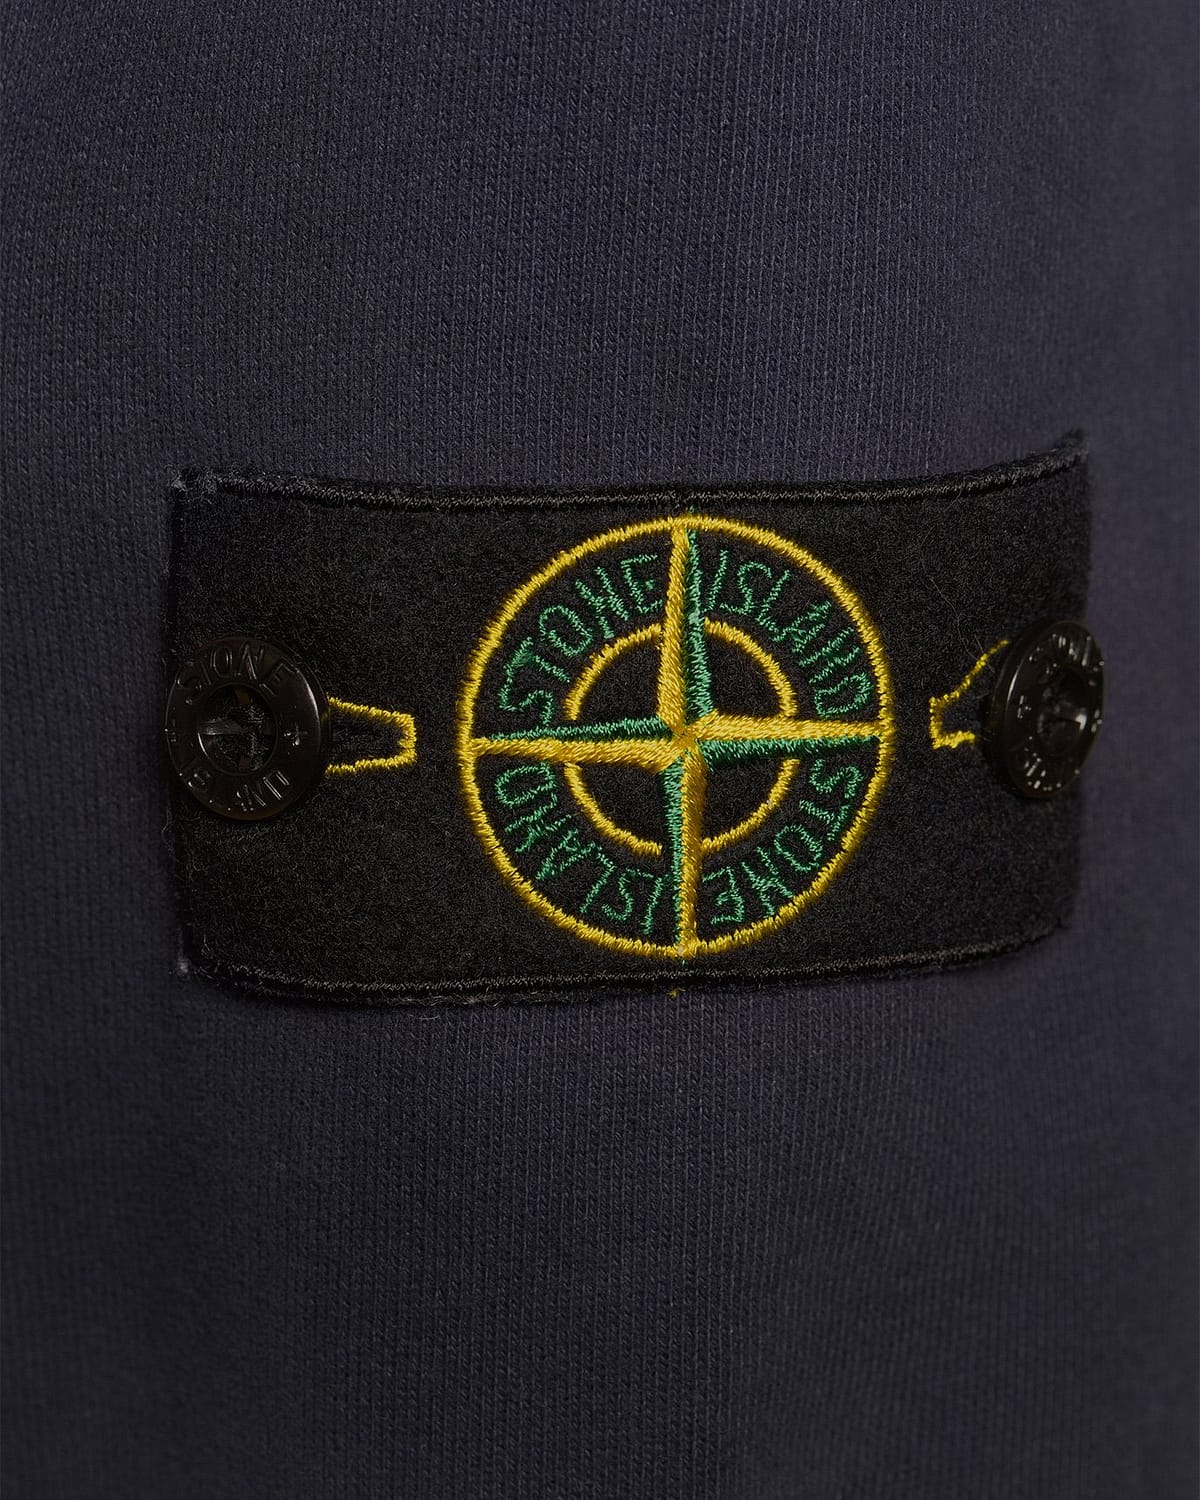 Stone Island Badges: From Humble Beginnings to Global Fashion Icons